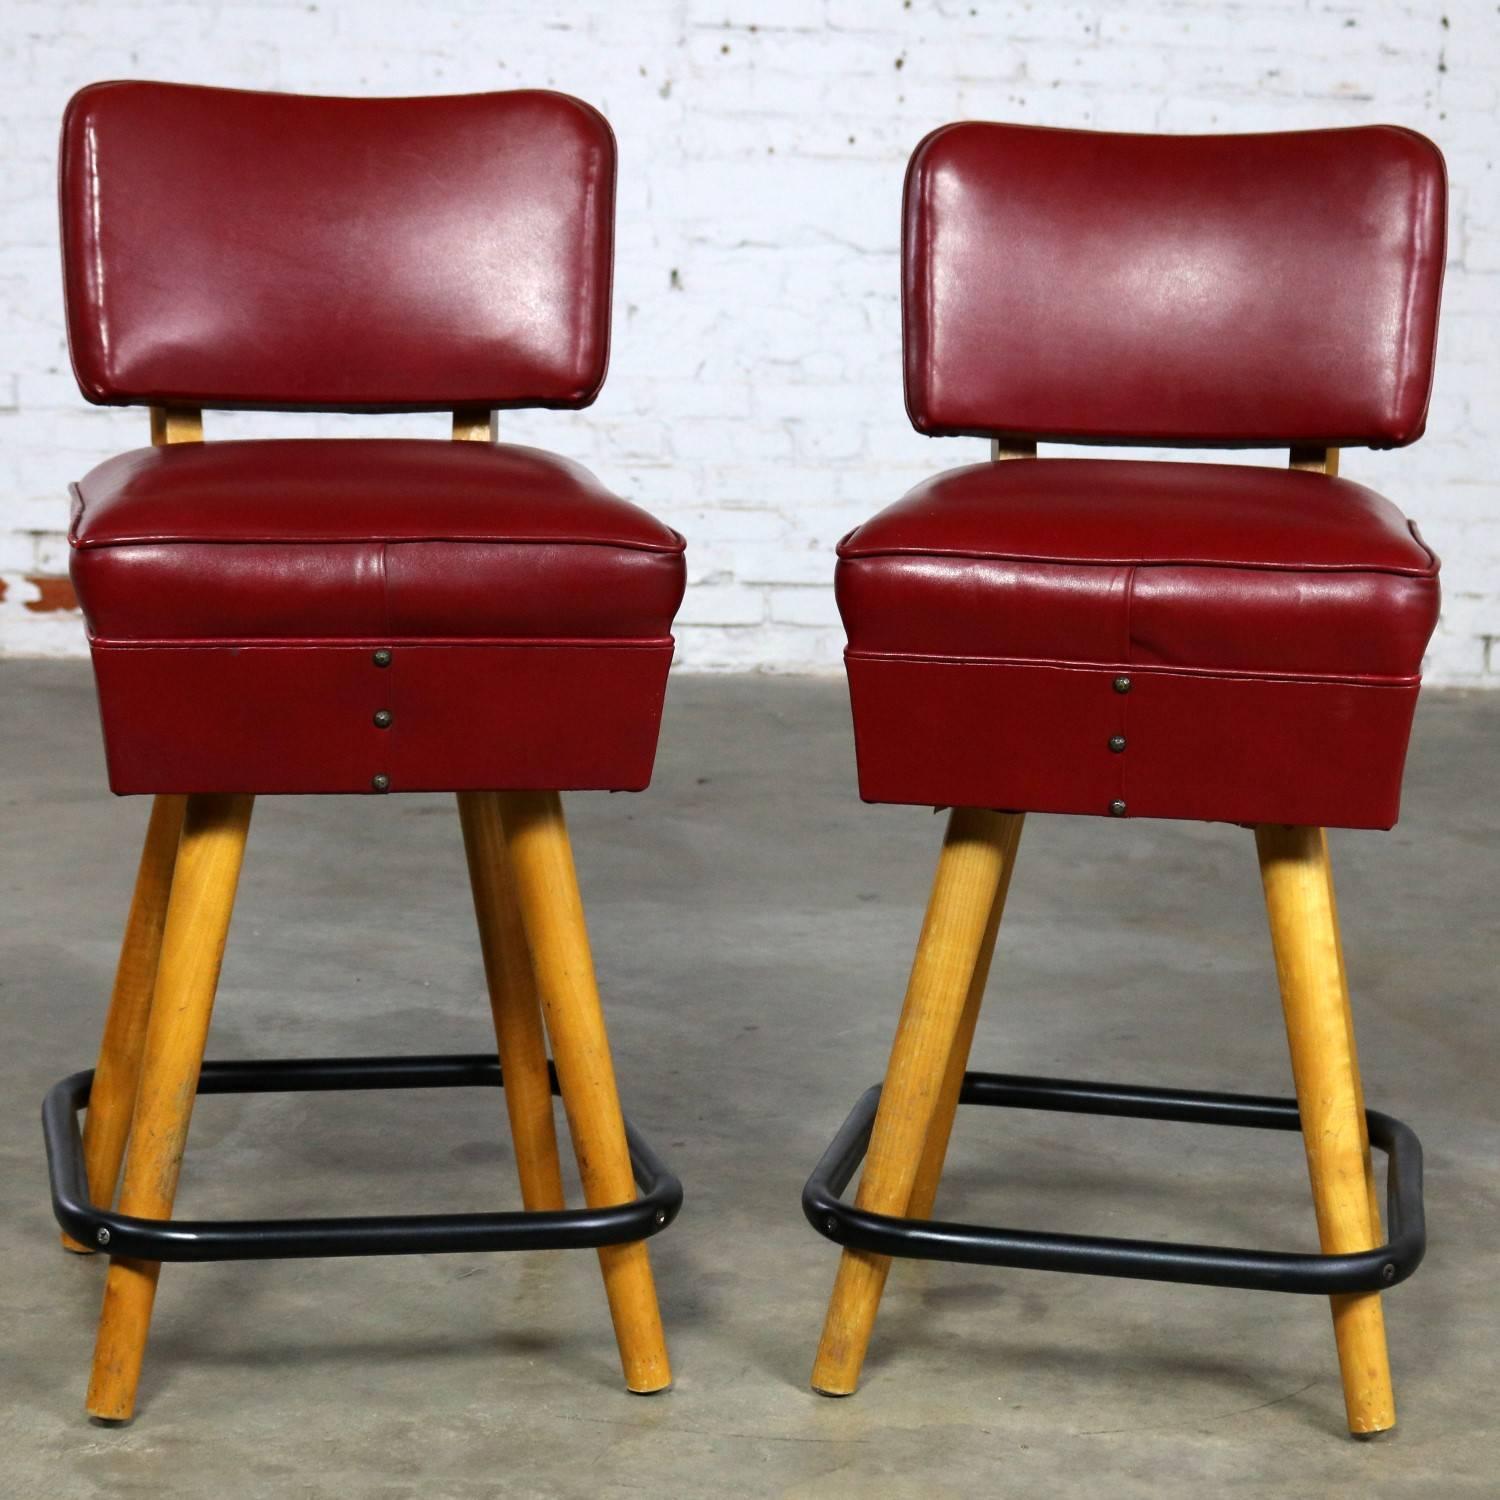 Mid-Century Modern Pair of Midcentury Red Vinyl and Blonde Counter Height Bistro Bar Stools by WCI